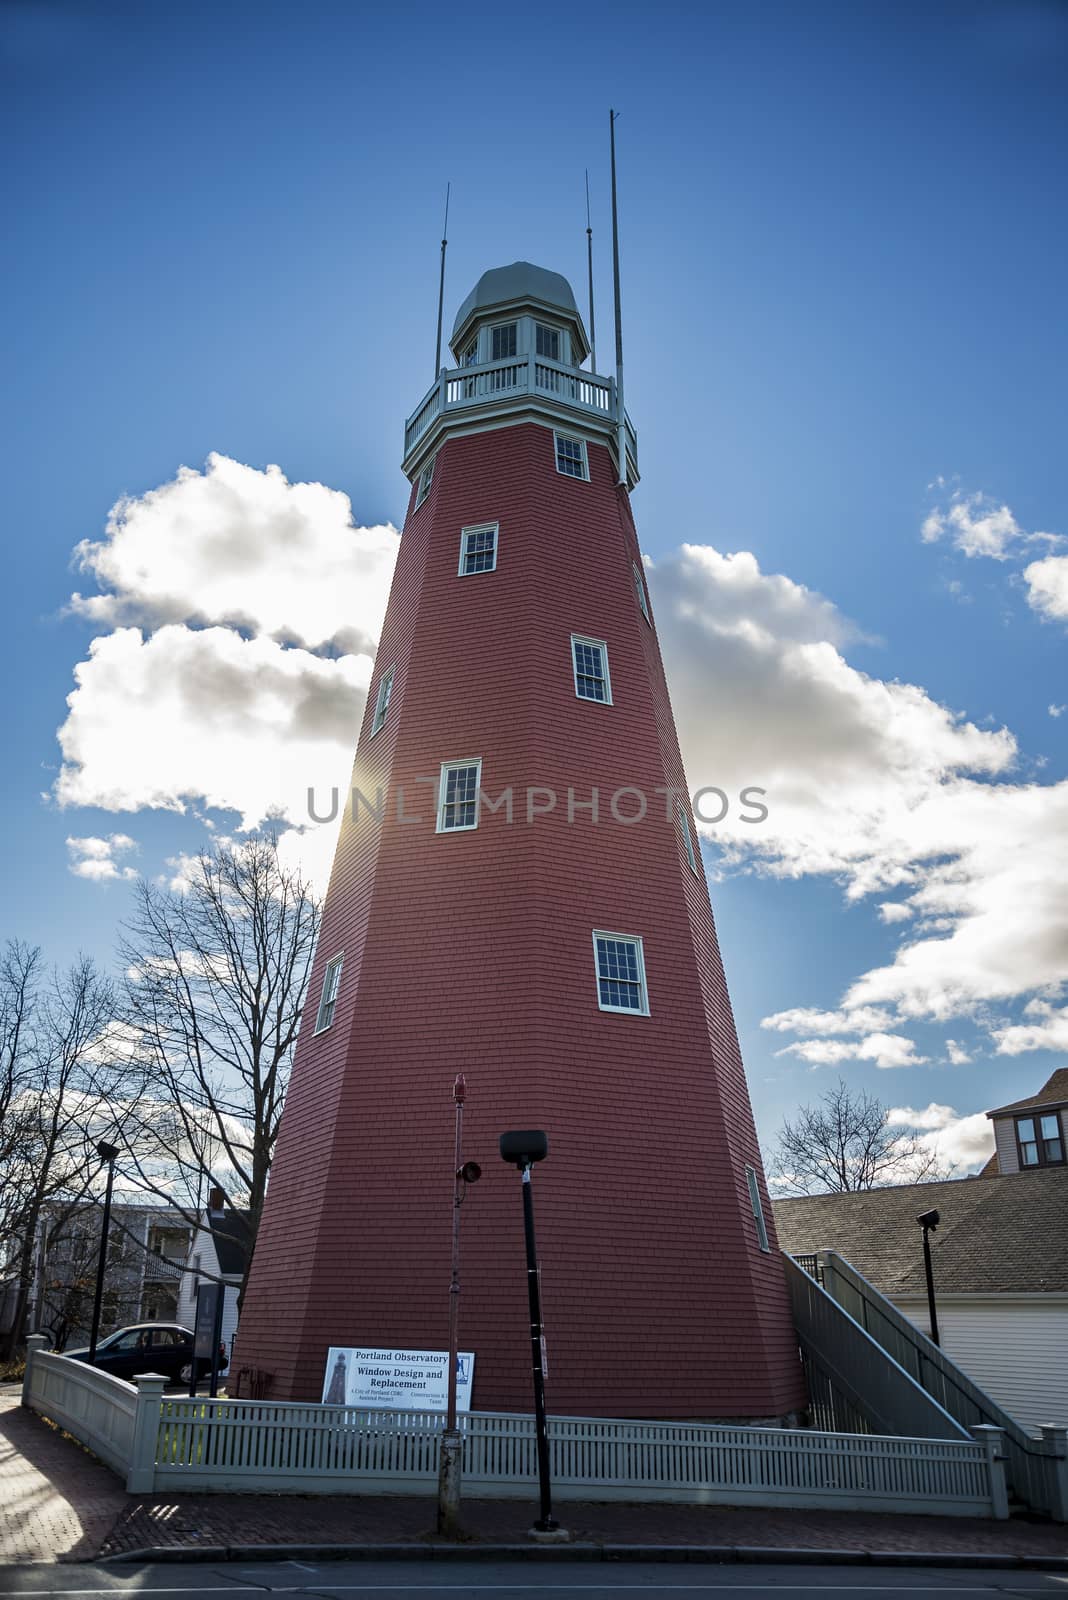 Old Portland Observatory, as landmark in the main city of Maine, USA